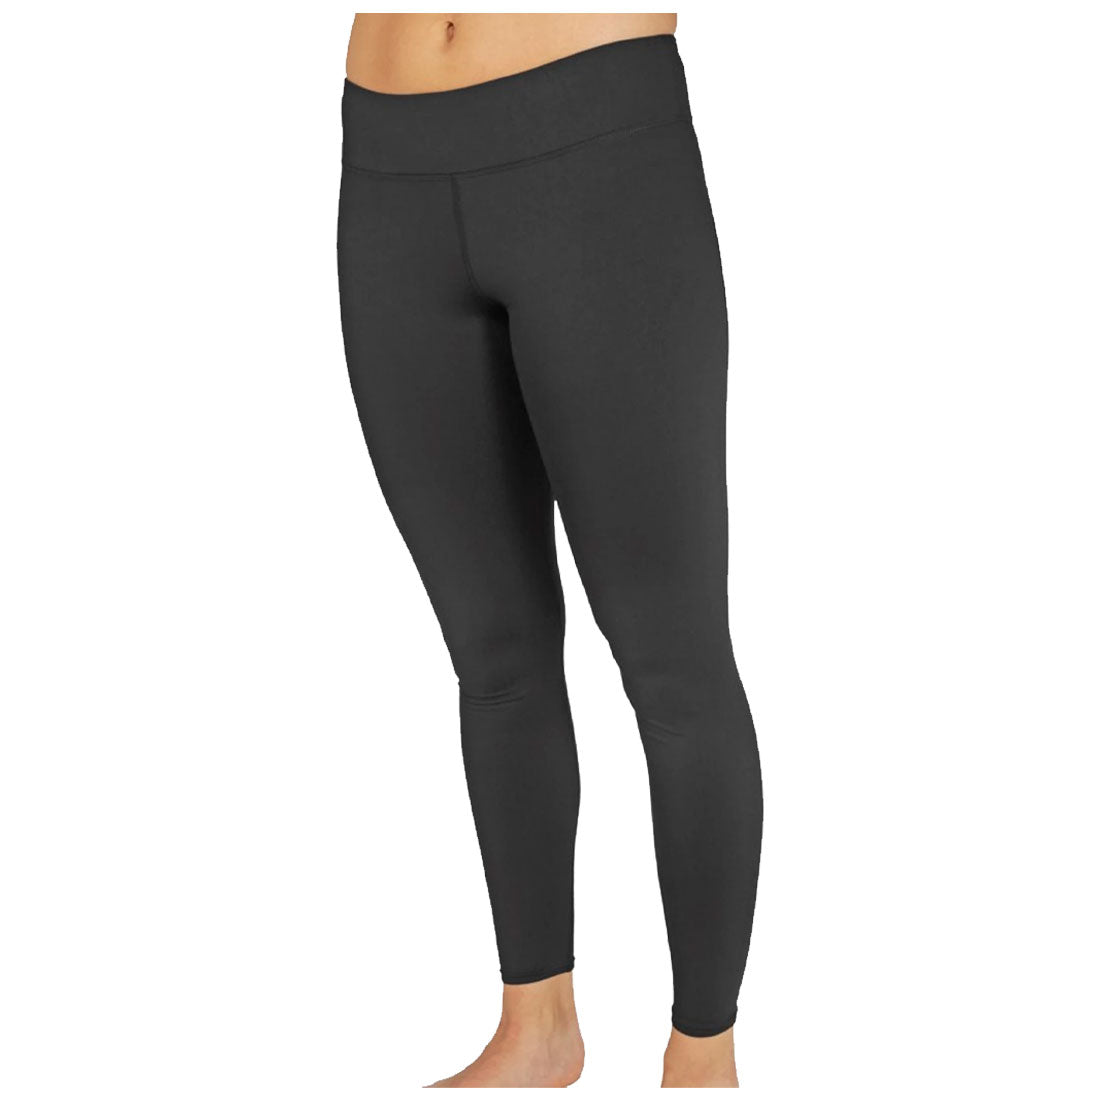 Hot Chillys MEC Ankle Tight (Box) - Women's